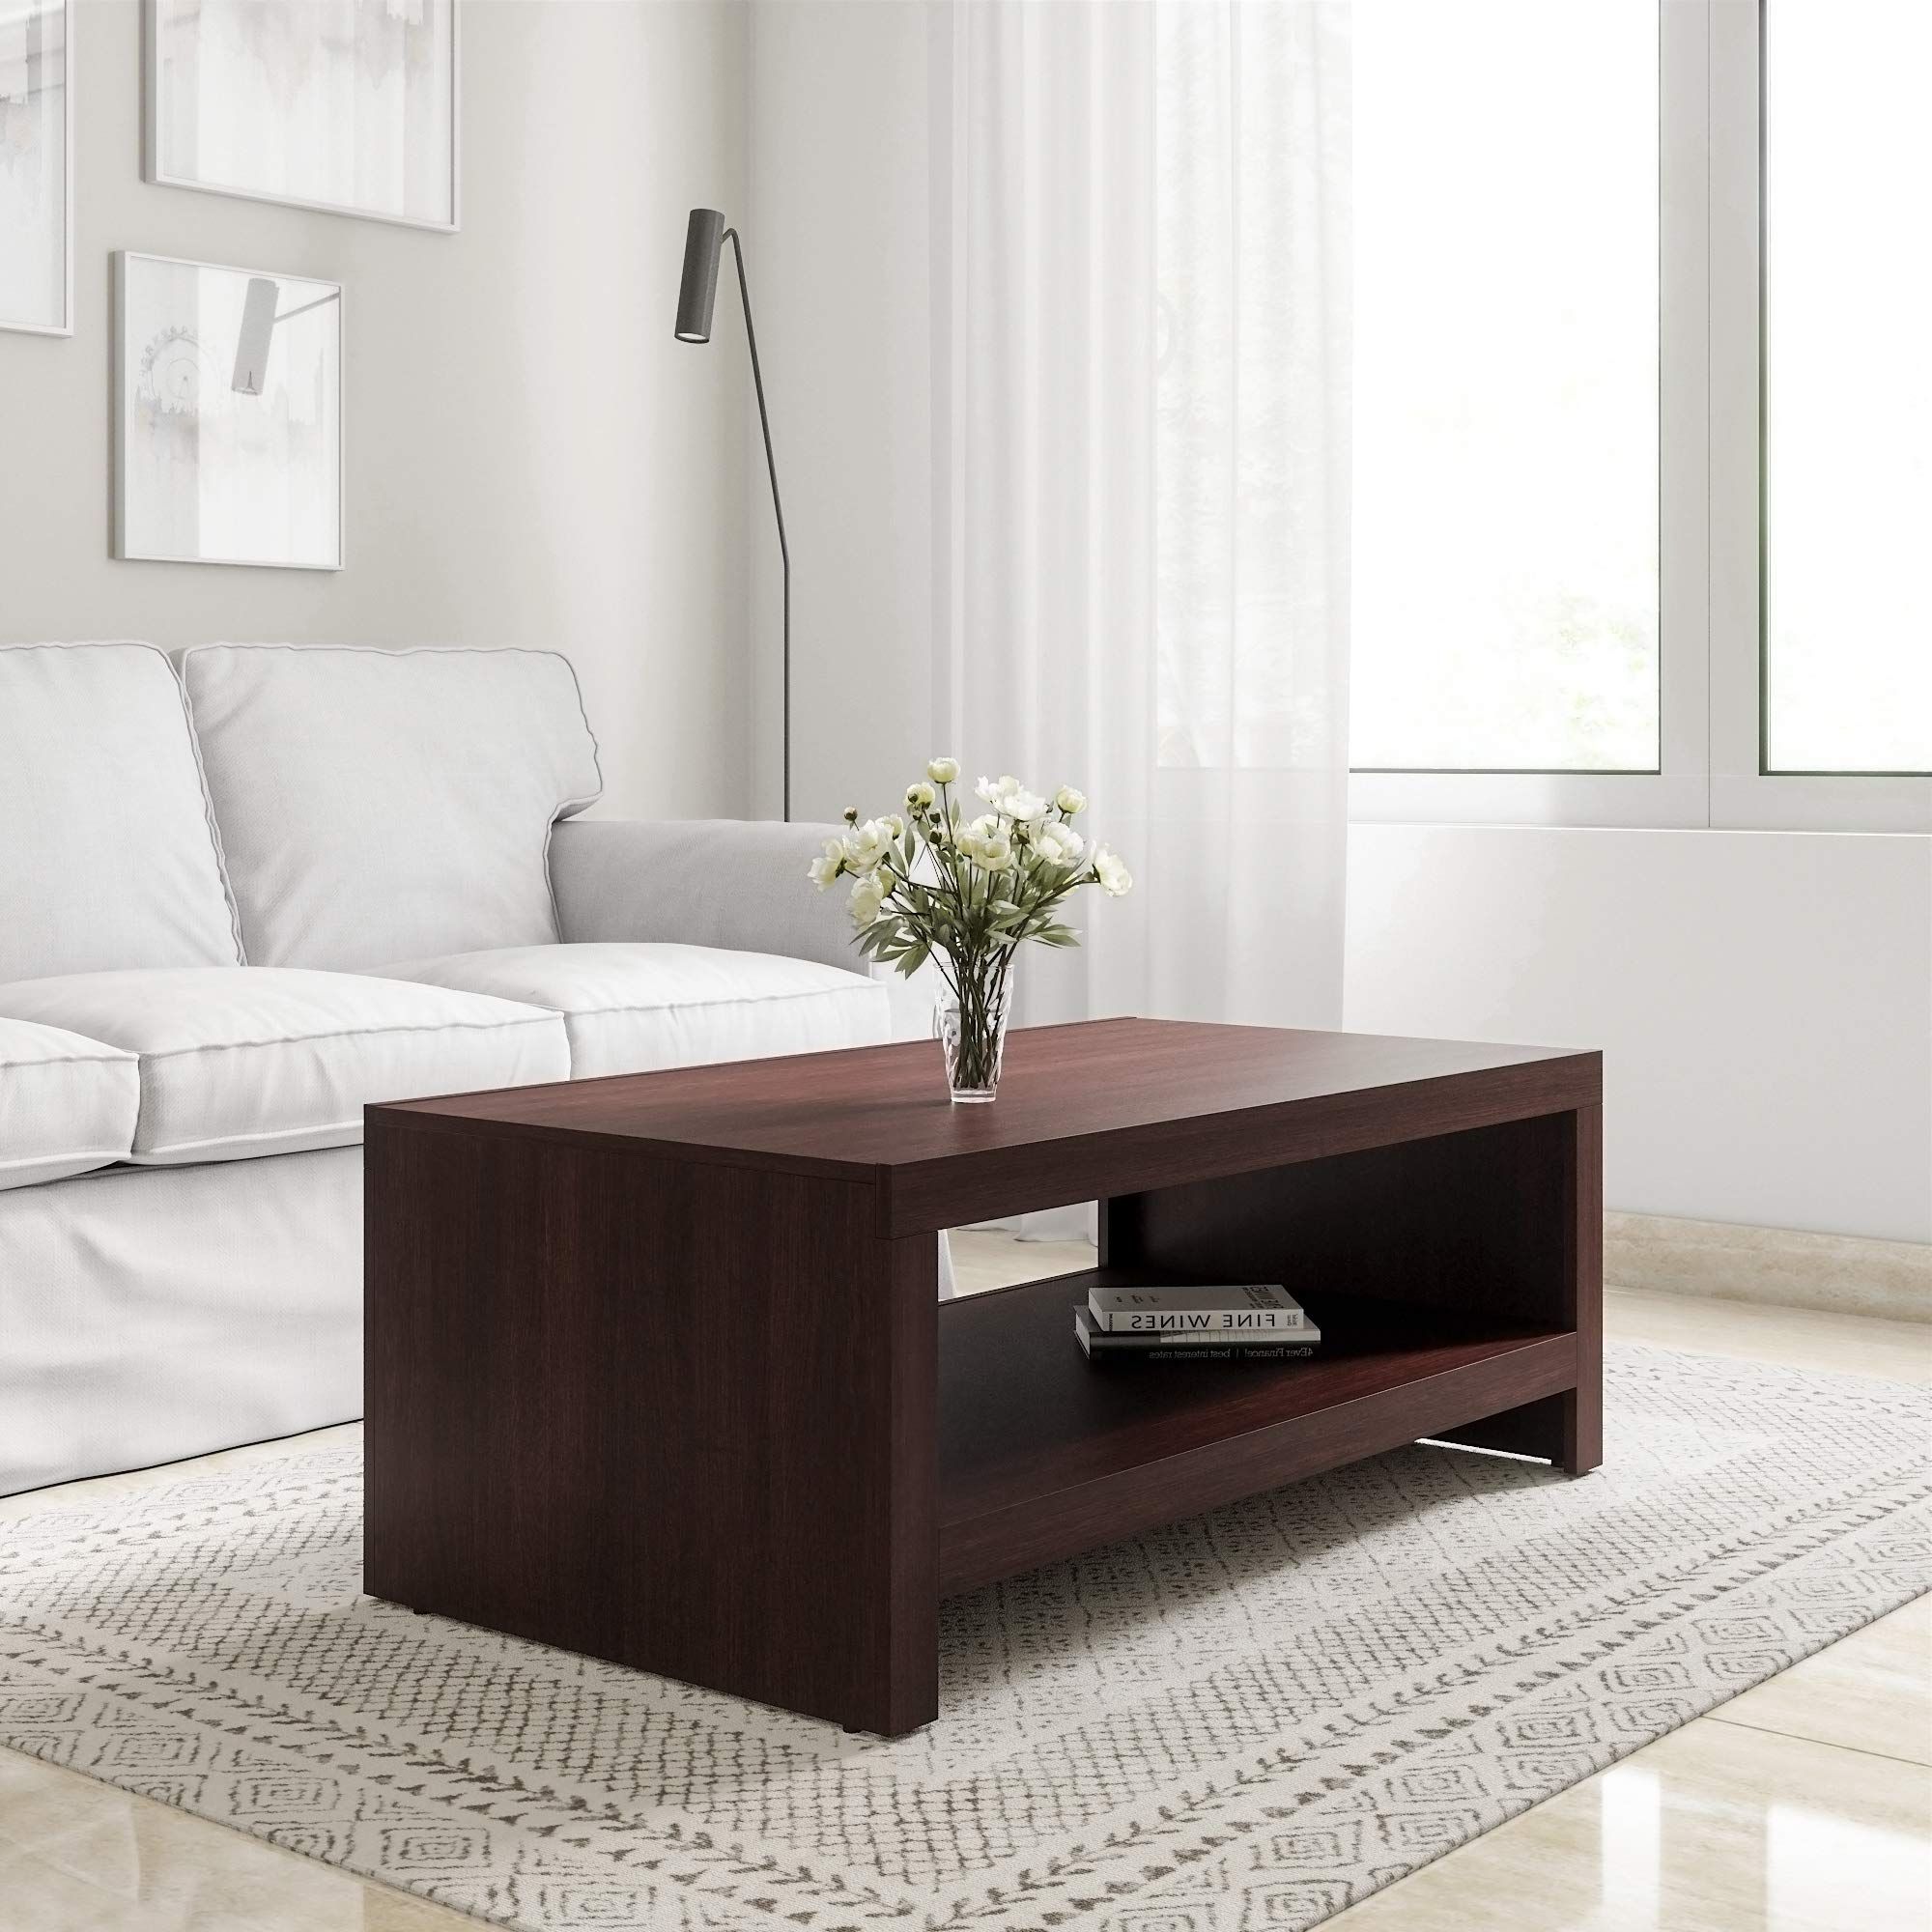 Well Liked Espresso Wood Finish Coffee Tables Within Amazon Brand – Solimo Capella Engineered Wood Espresso Finish Modern Coffee  Table (brown) : Amazon.in: Home & Kitchen (Photo 2 of 10)